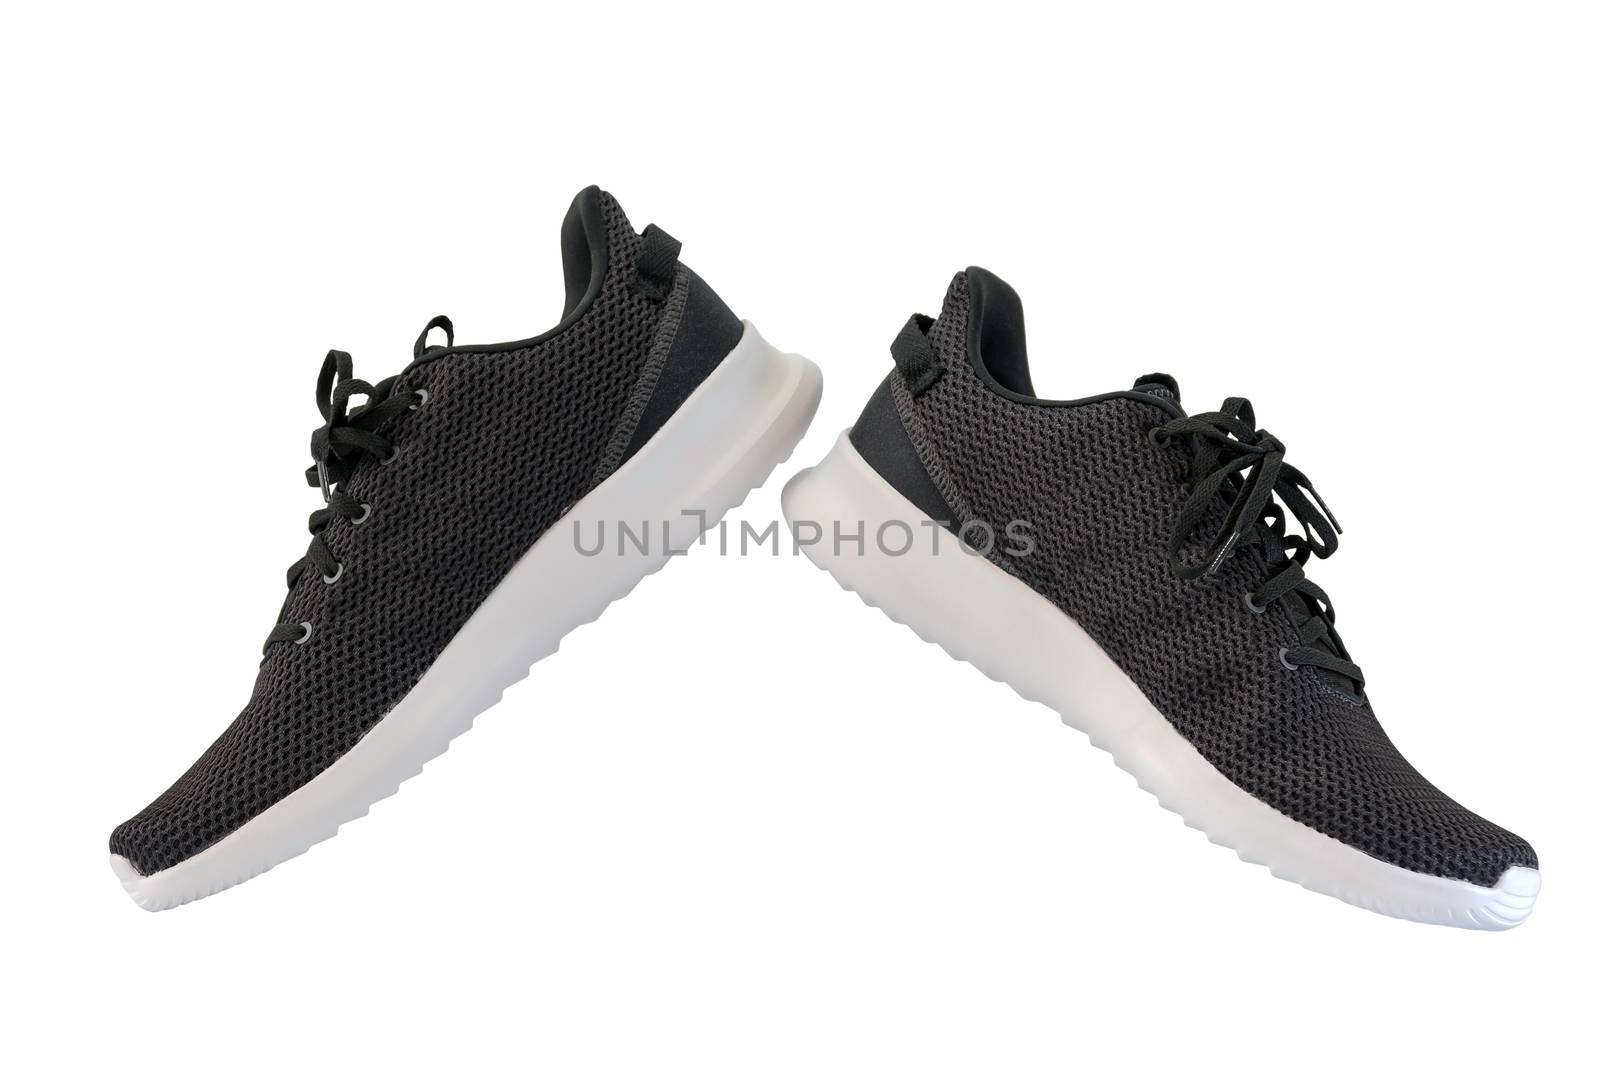 Black sneakers running shoes  by wattanaphob